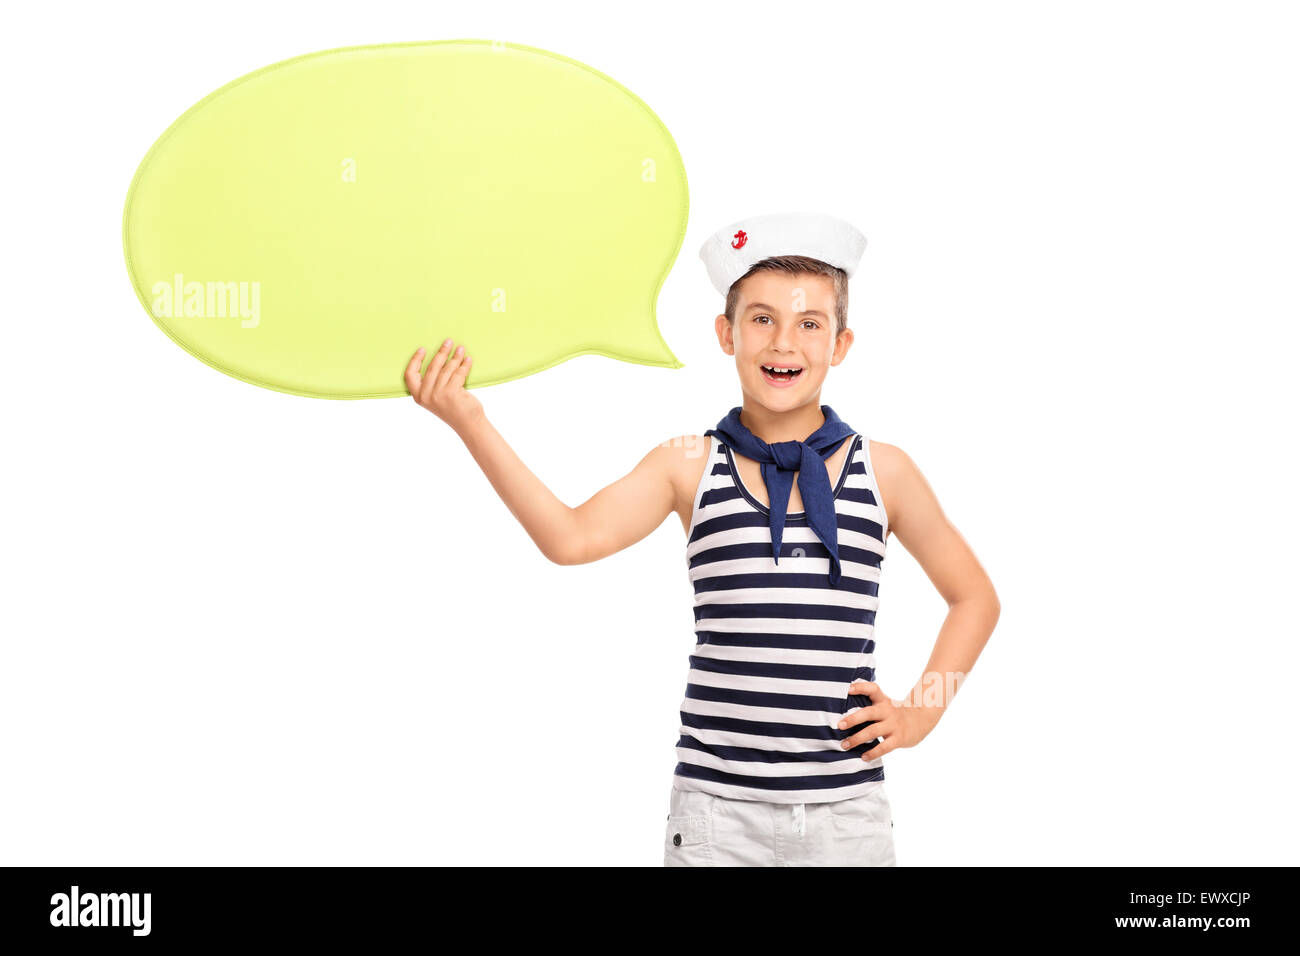 Little kid in a sailor outfit holding a speech bubble and looking at the camera isolated on white background Stock Photo